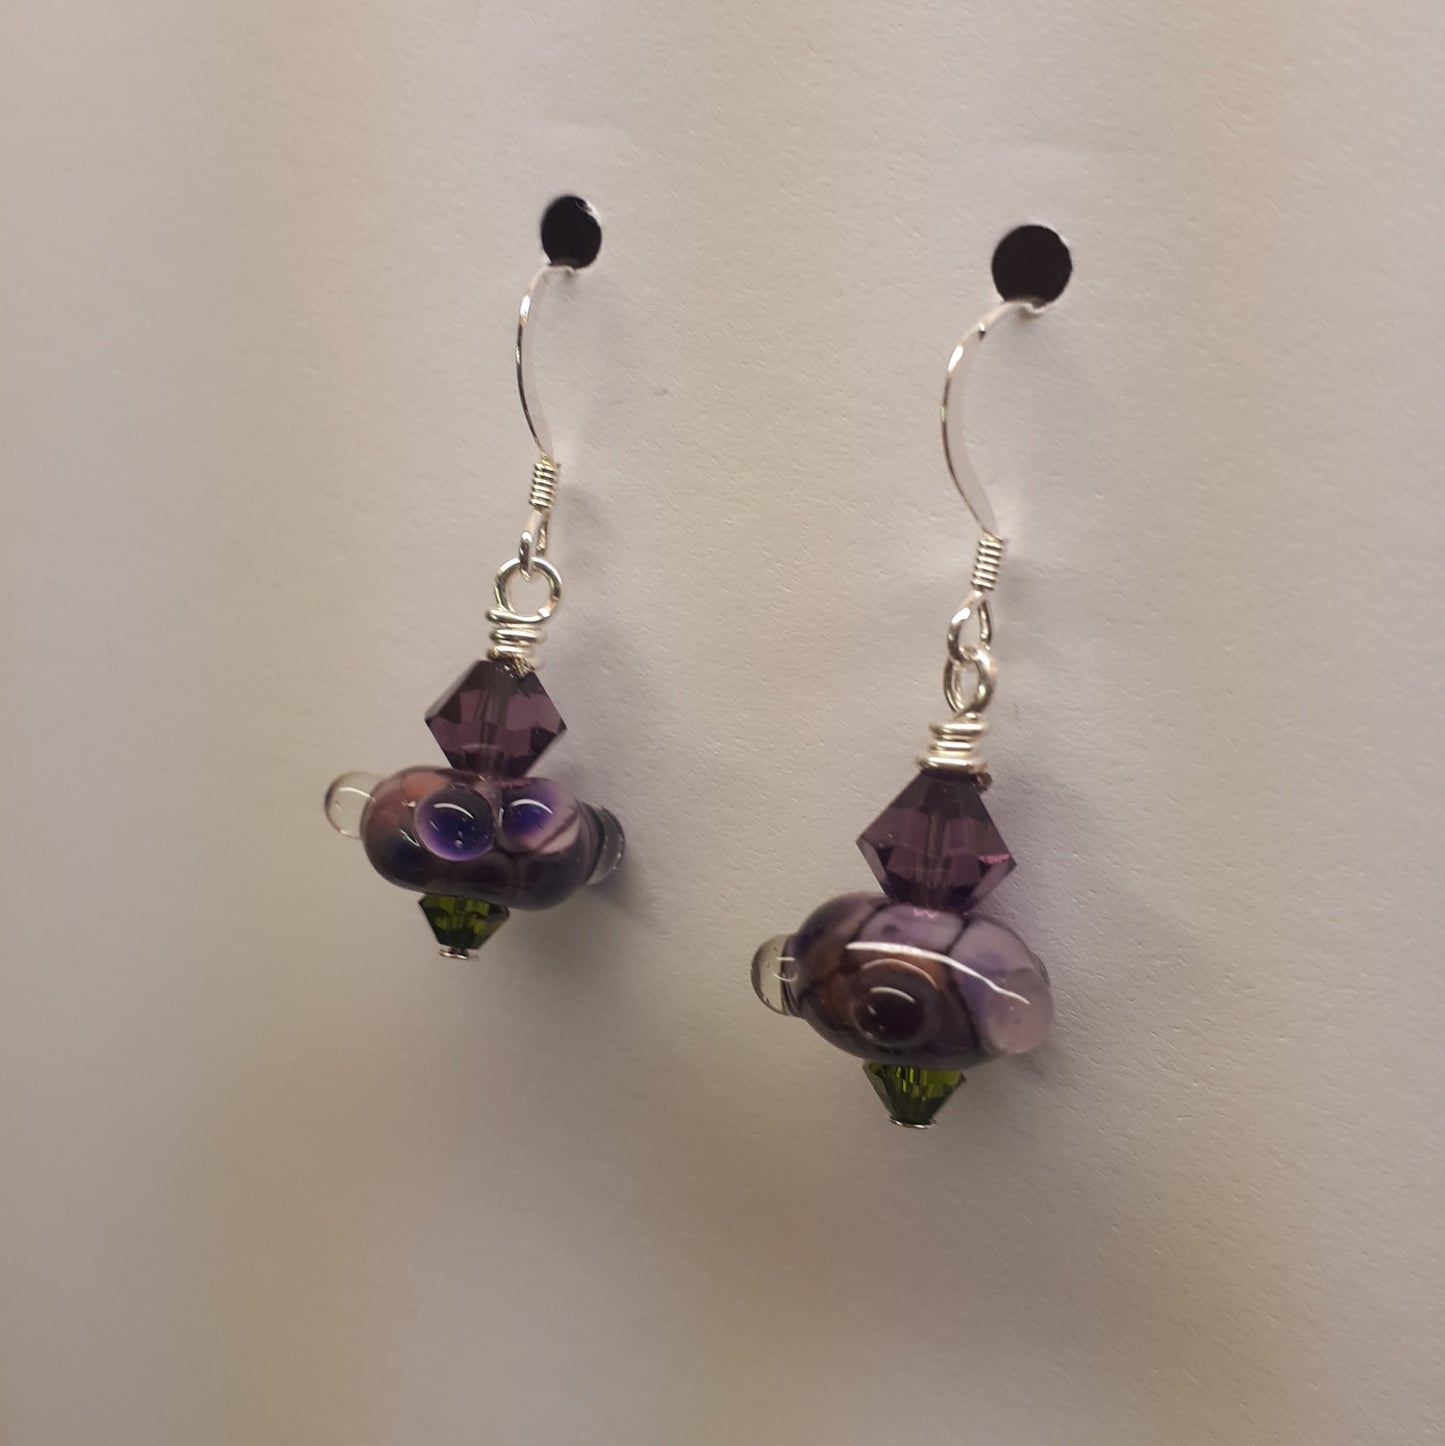 Earrings: Wild Orchid Small Bead